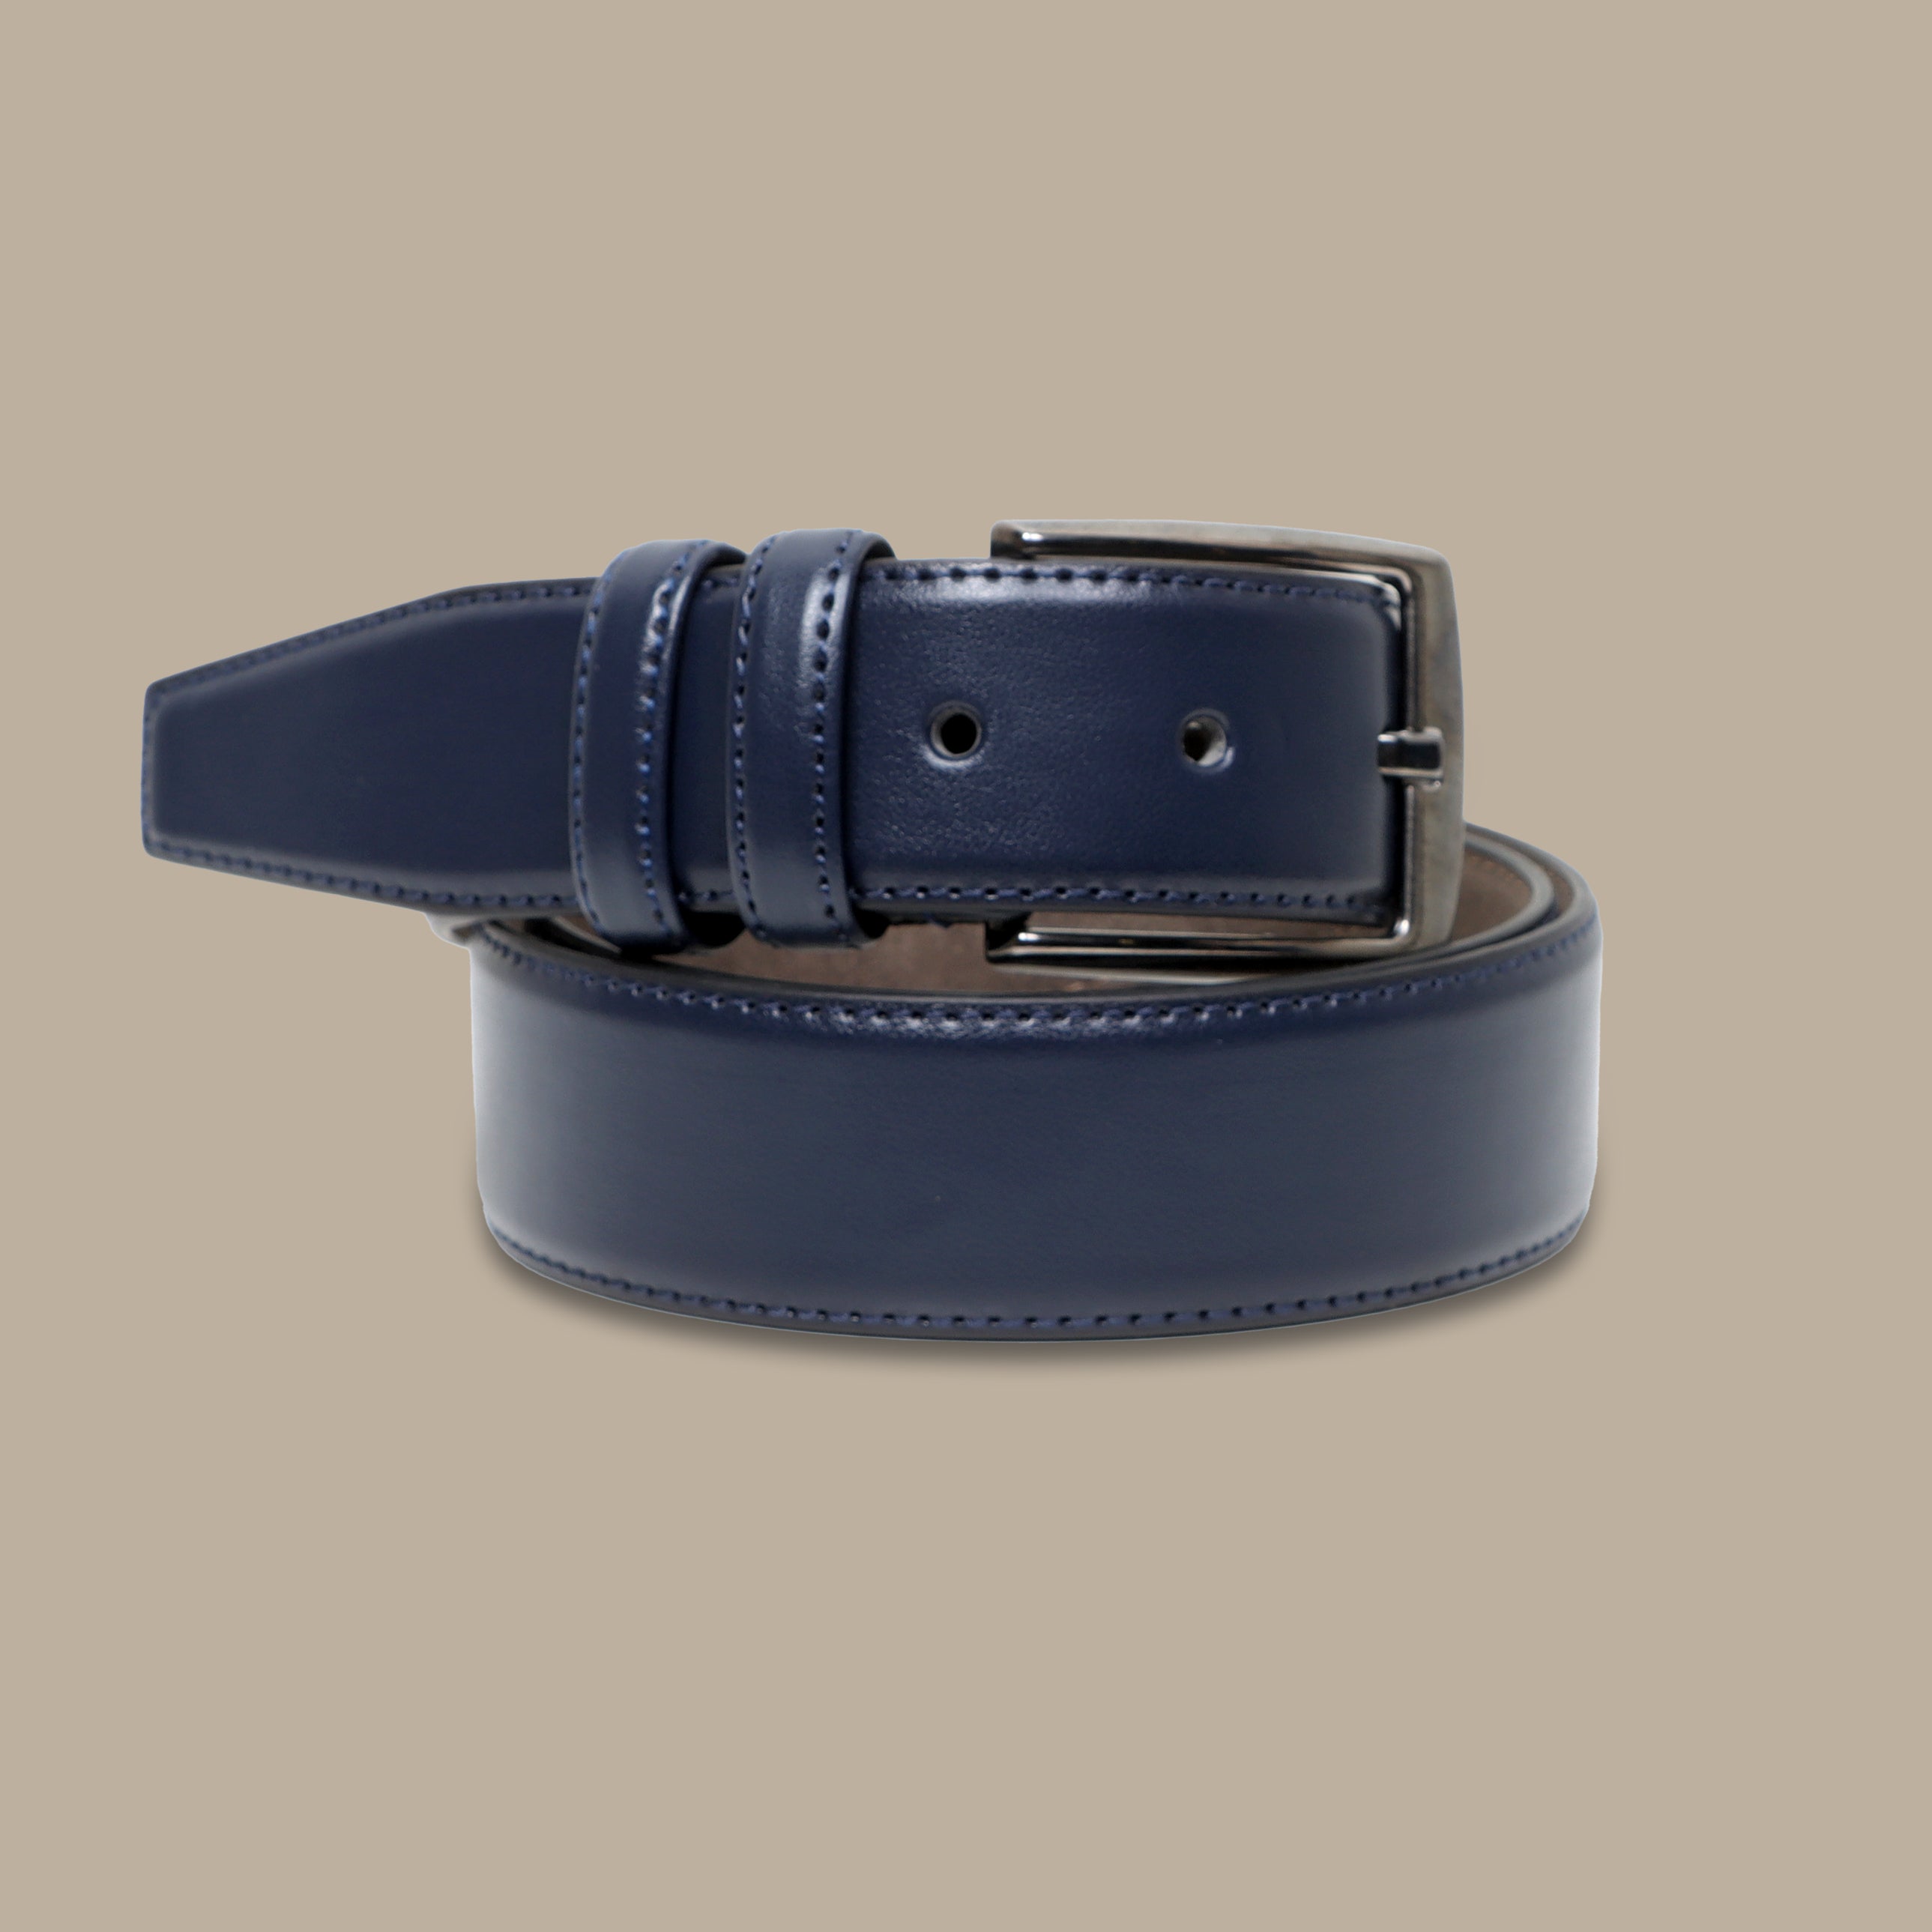 Navy Essentials: Classic PU Basic Belt for Timeless Style